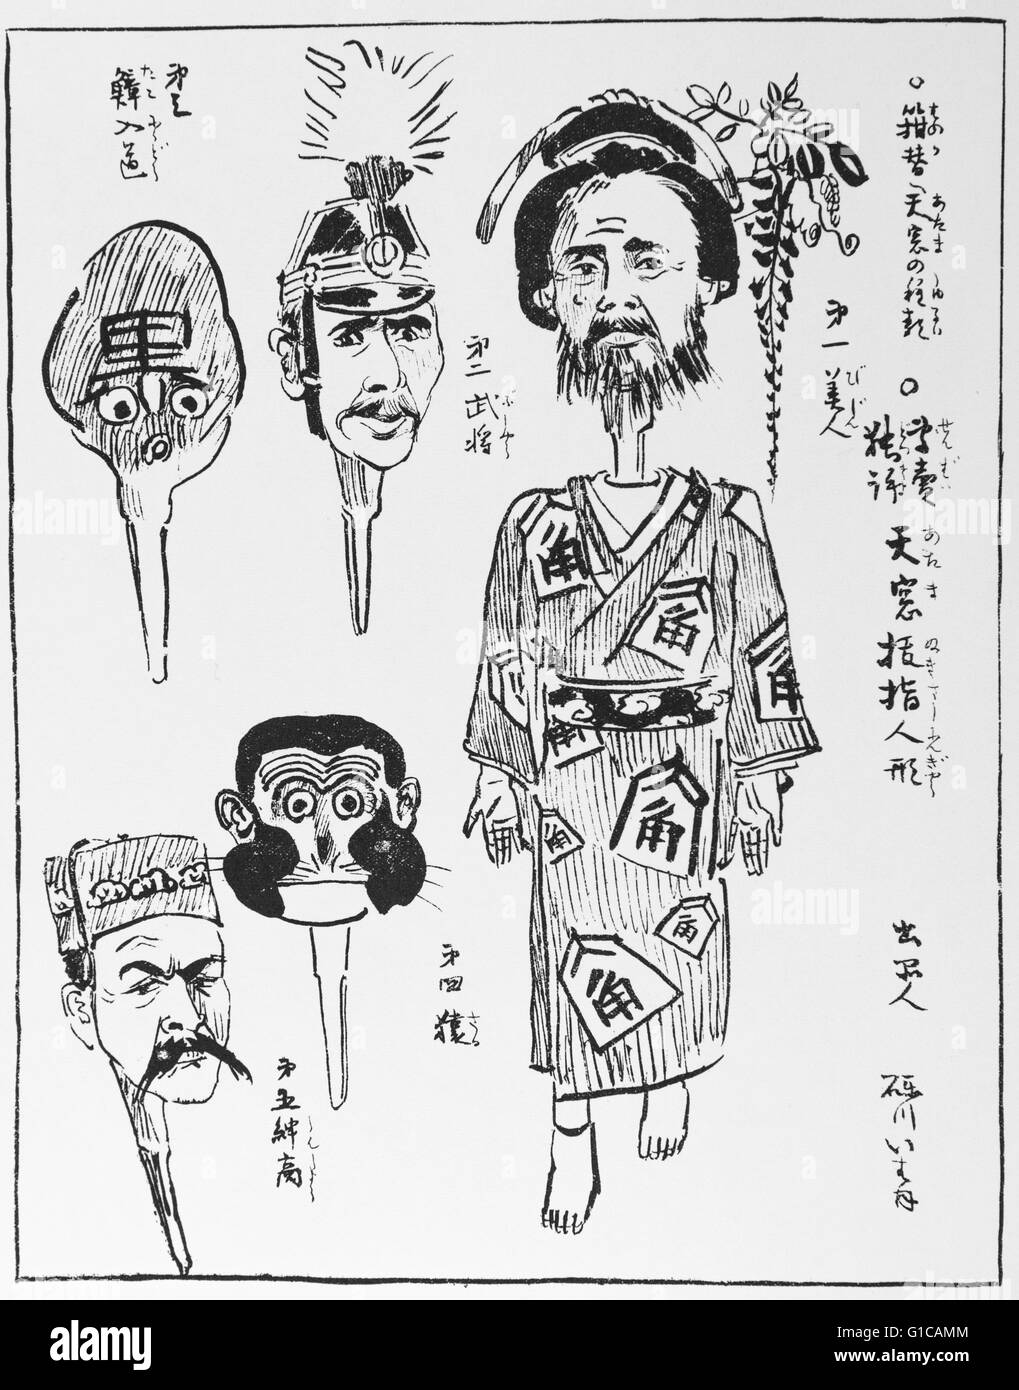 Head changing doll, published on Maru Maru Chimbun July 6th 1895 (No.1039). Even though head changes,it does not change essentially. This is a caricature for cabinet and prime minister.  Woman is Hirobumi Ito, Soldier is Aritomo Yamagata, Octopus is Kiyotaka Kuroda, Monkey is Kaoru Inoue, Merchant is Masayoshi Matsukata. Artist Beisaku Taguchi ( 1864 - 1903). Stock Photo